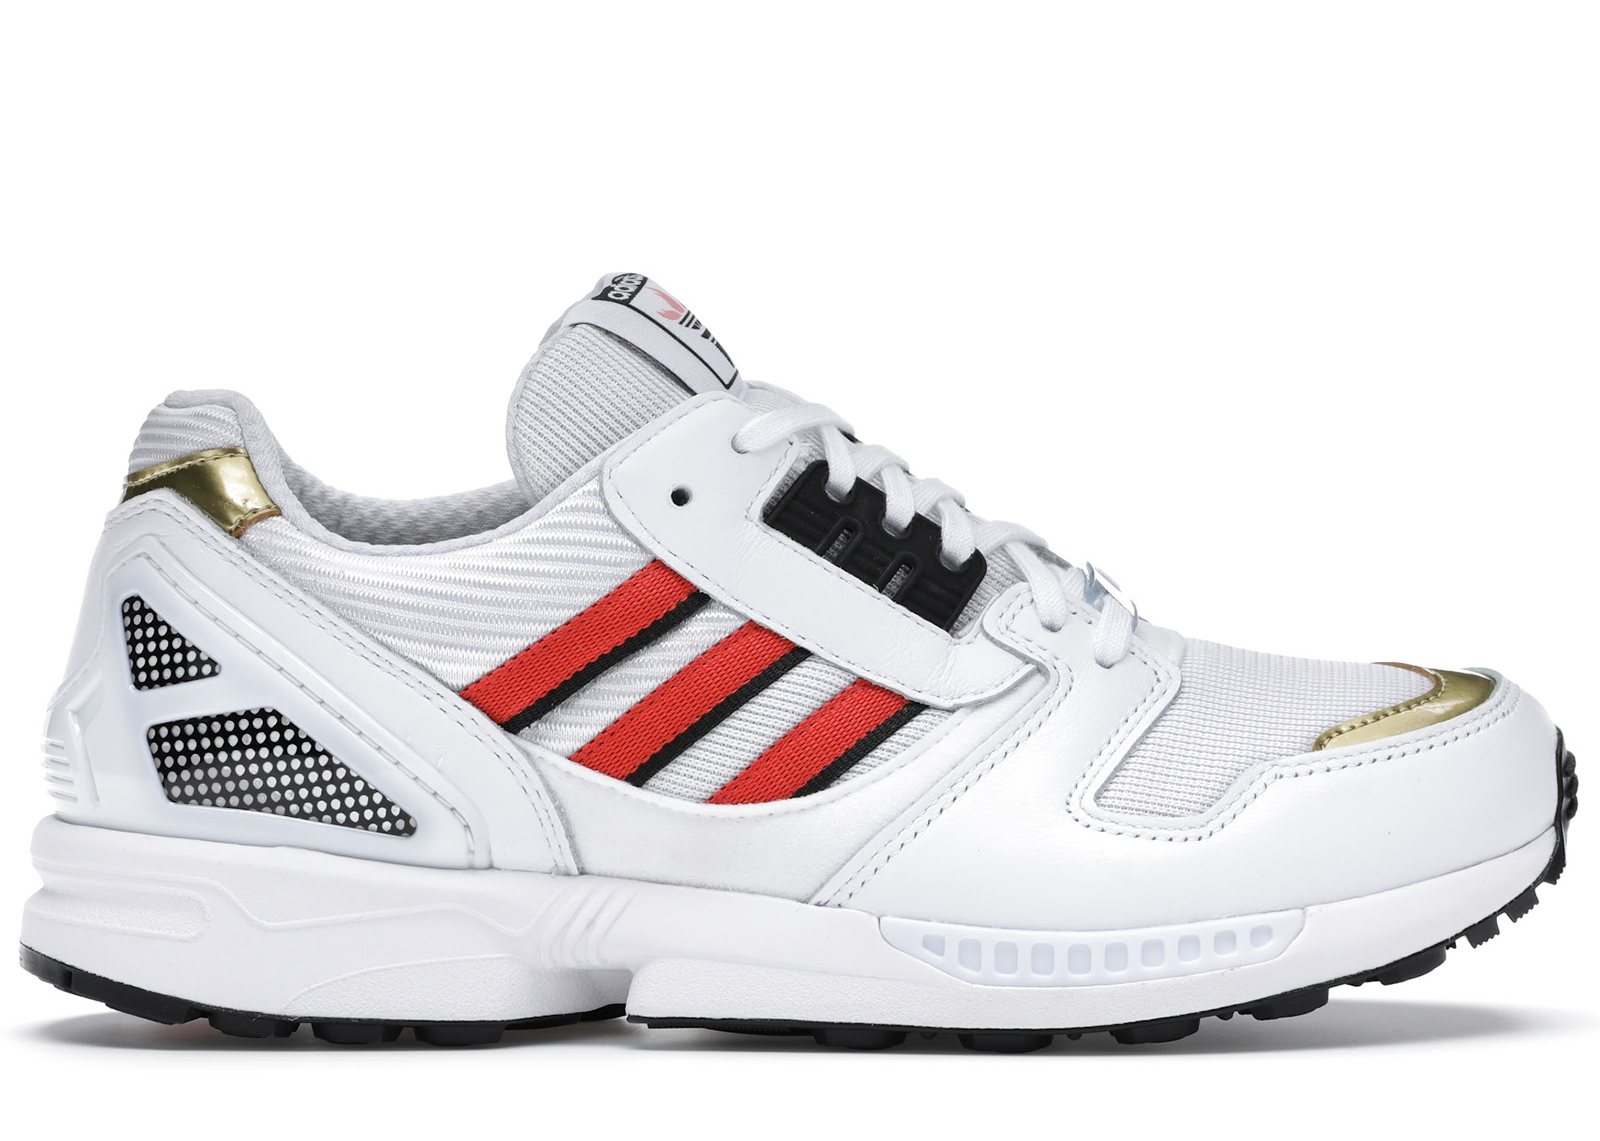 adidas ZX 8000 Olympic (2020) Men's - FX9152 - US